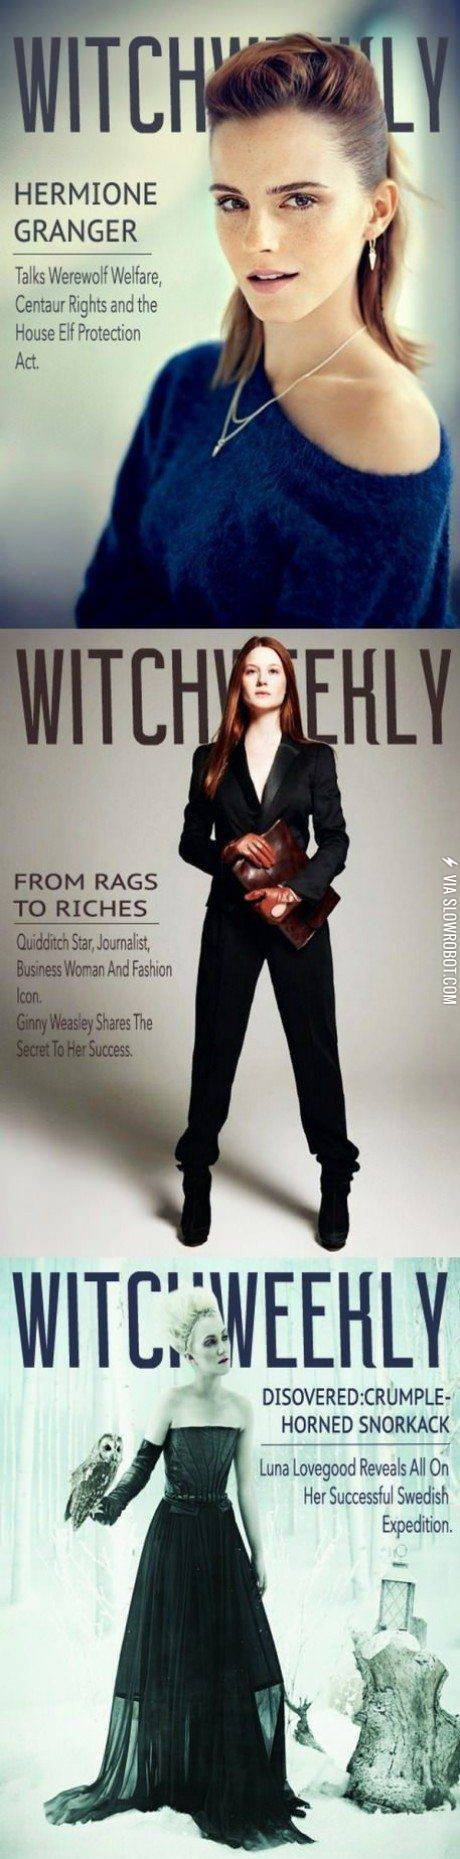 Hermione%2C+Ginny+and+Luna+all+grown-up+and+on+the+cover+of+Witch+Weekly.